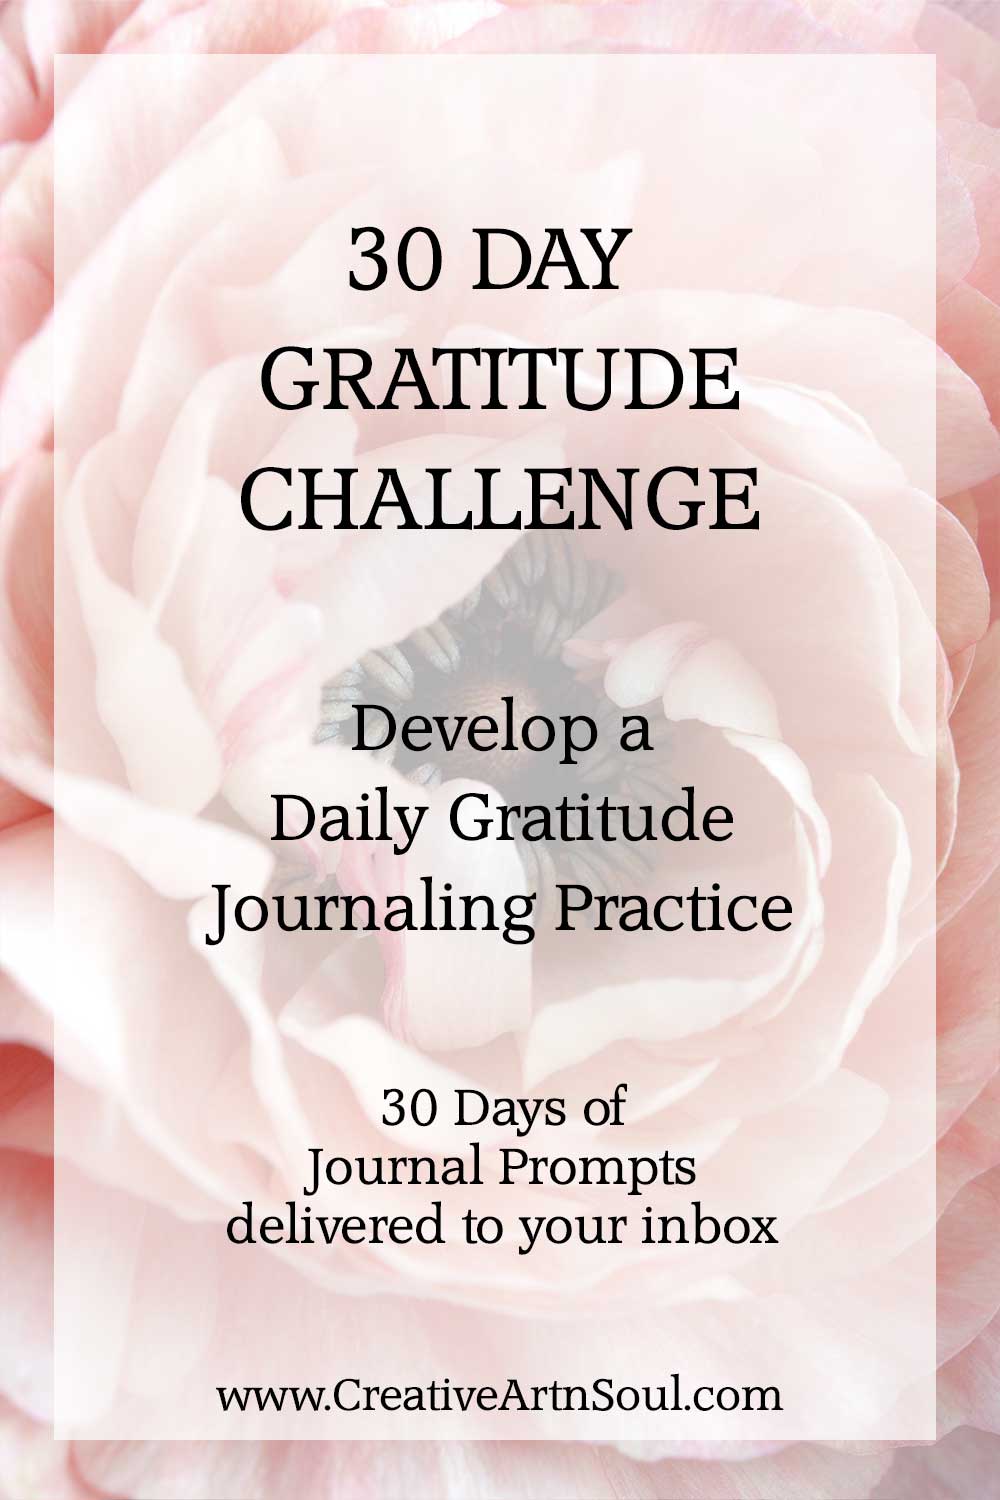 Take the 30 Day Gratitude Challenge and Develop a Daily Gratitude Journaling Practice